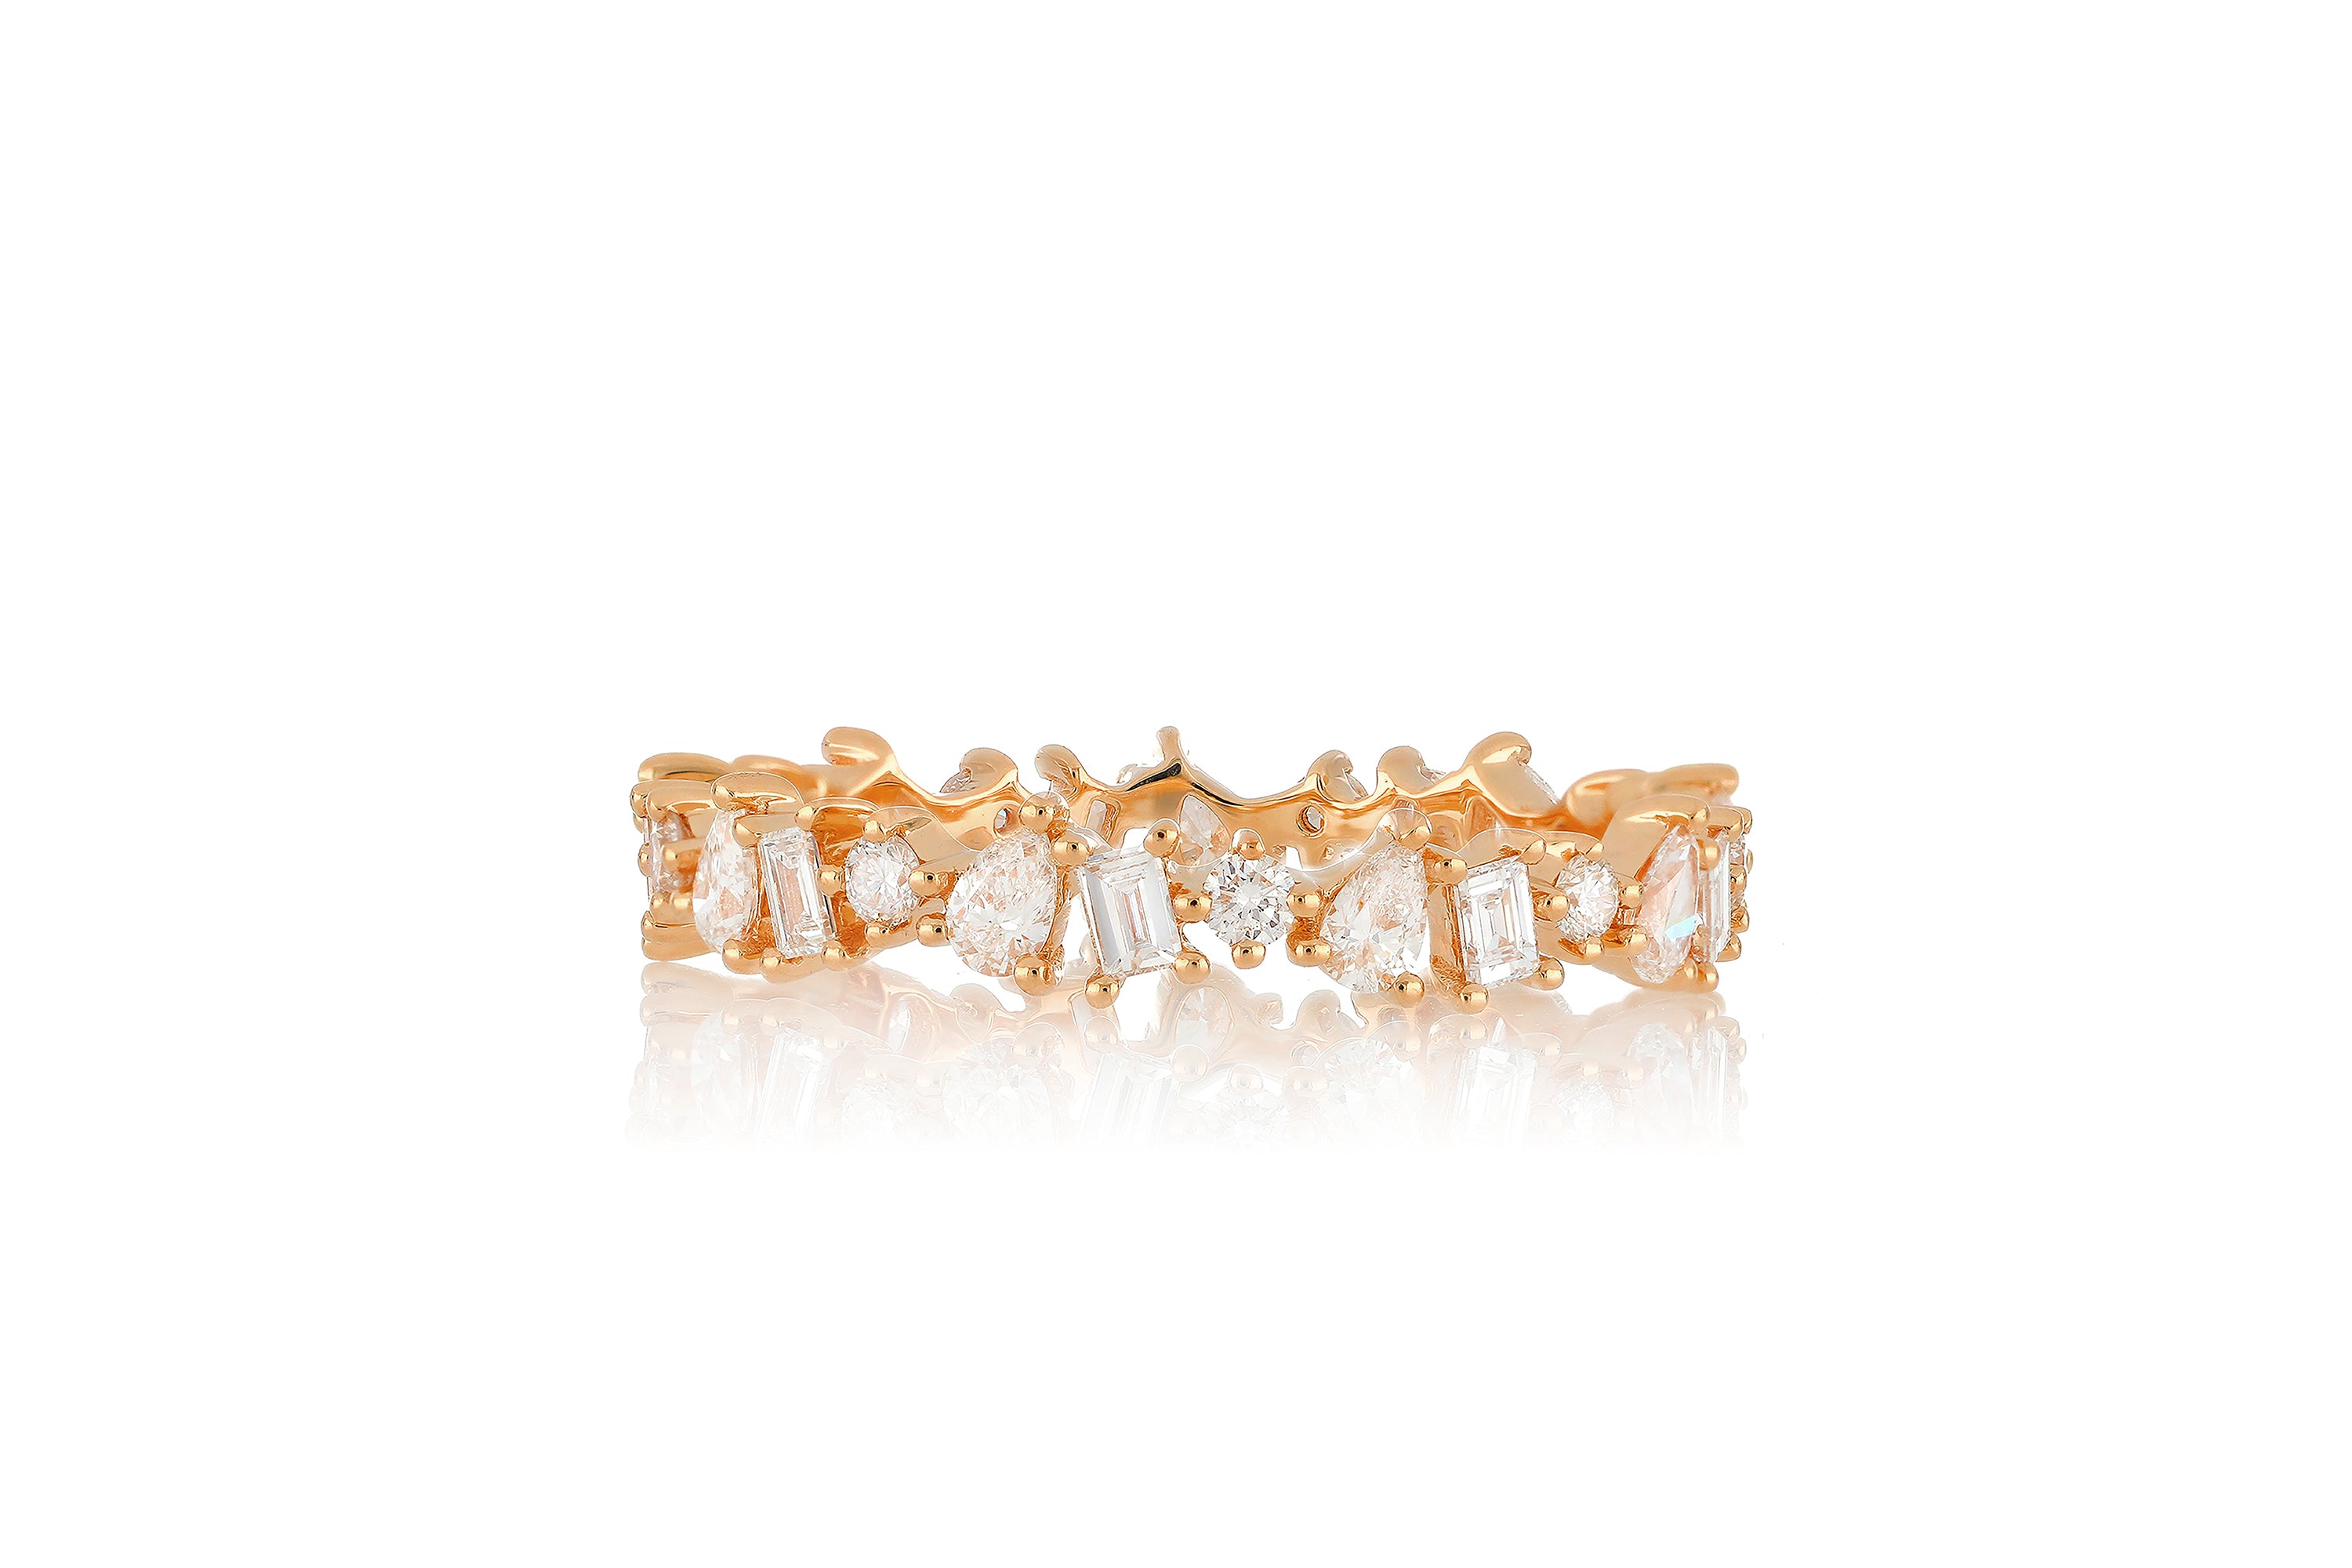 14k rose gold multi faceted diamond ring with baguette diamonds, pear shaped diamonds, and round diamonds all around.